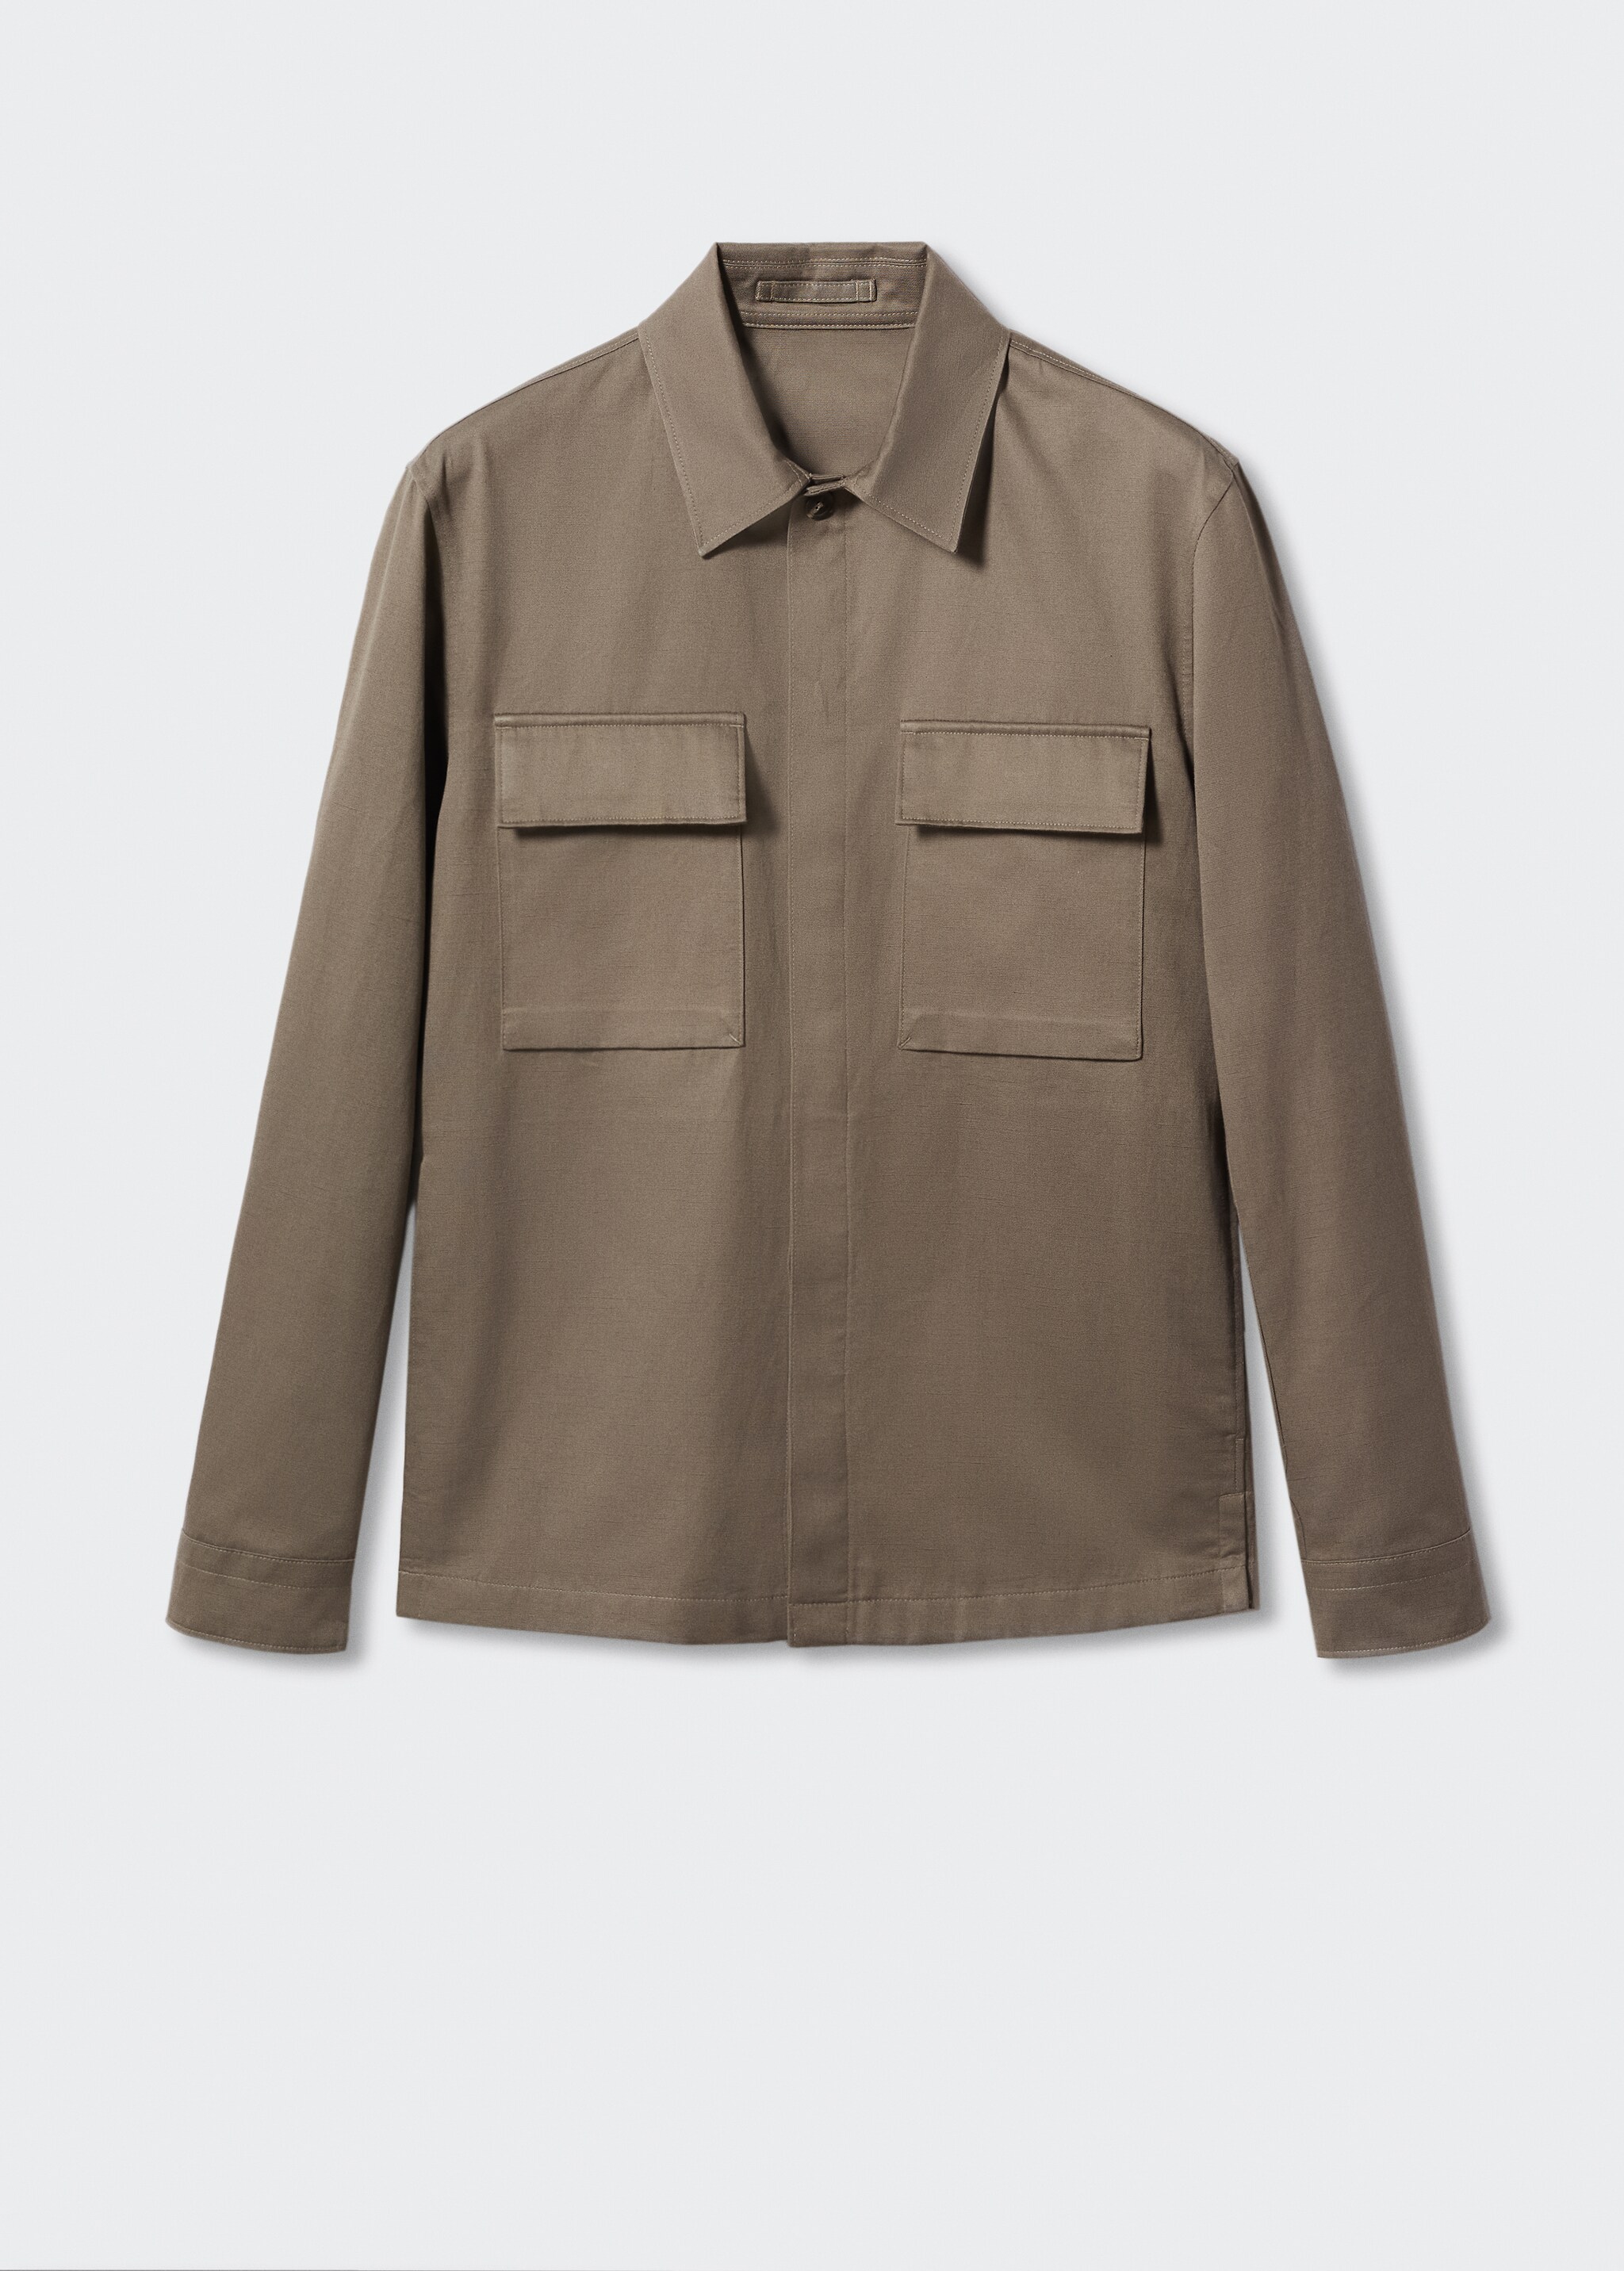 Linen cotton overshirt with pockets - Article without model